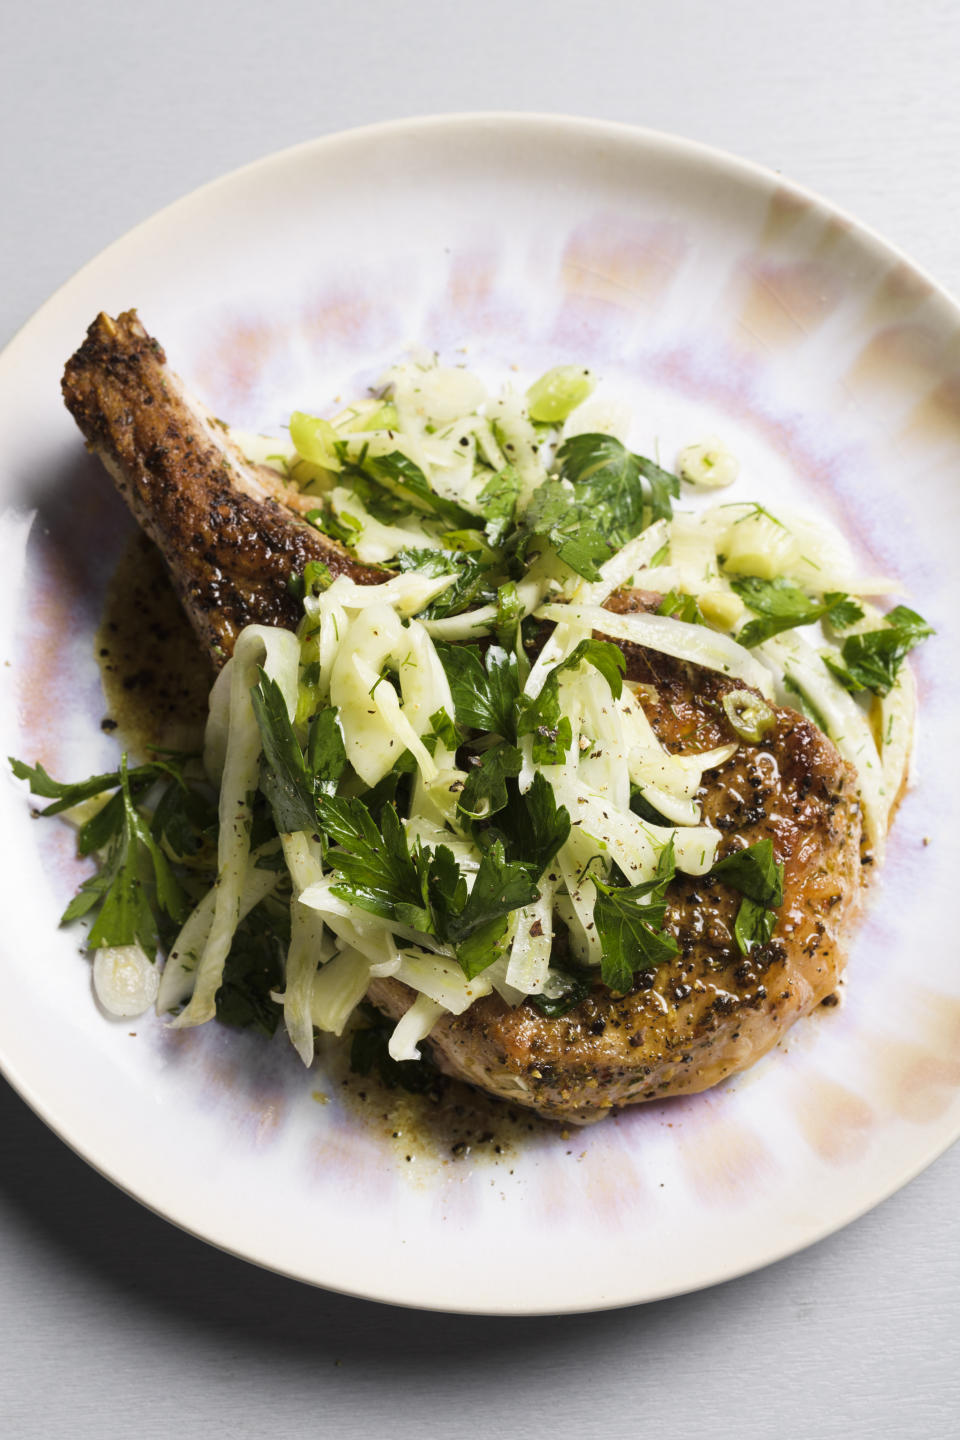 This image released by Milk Street shows a recipe for seared pork chops with a fennel and herb salad. (Milk Street via AP)